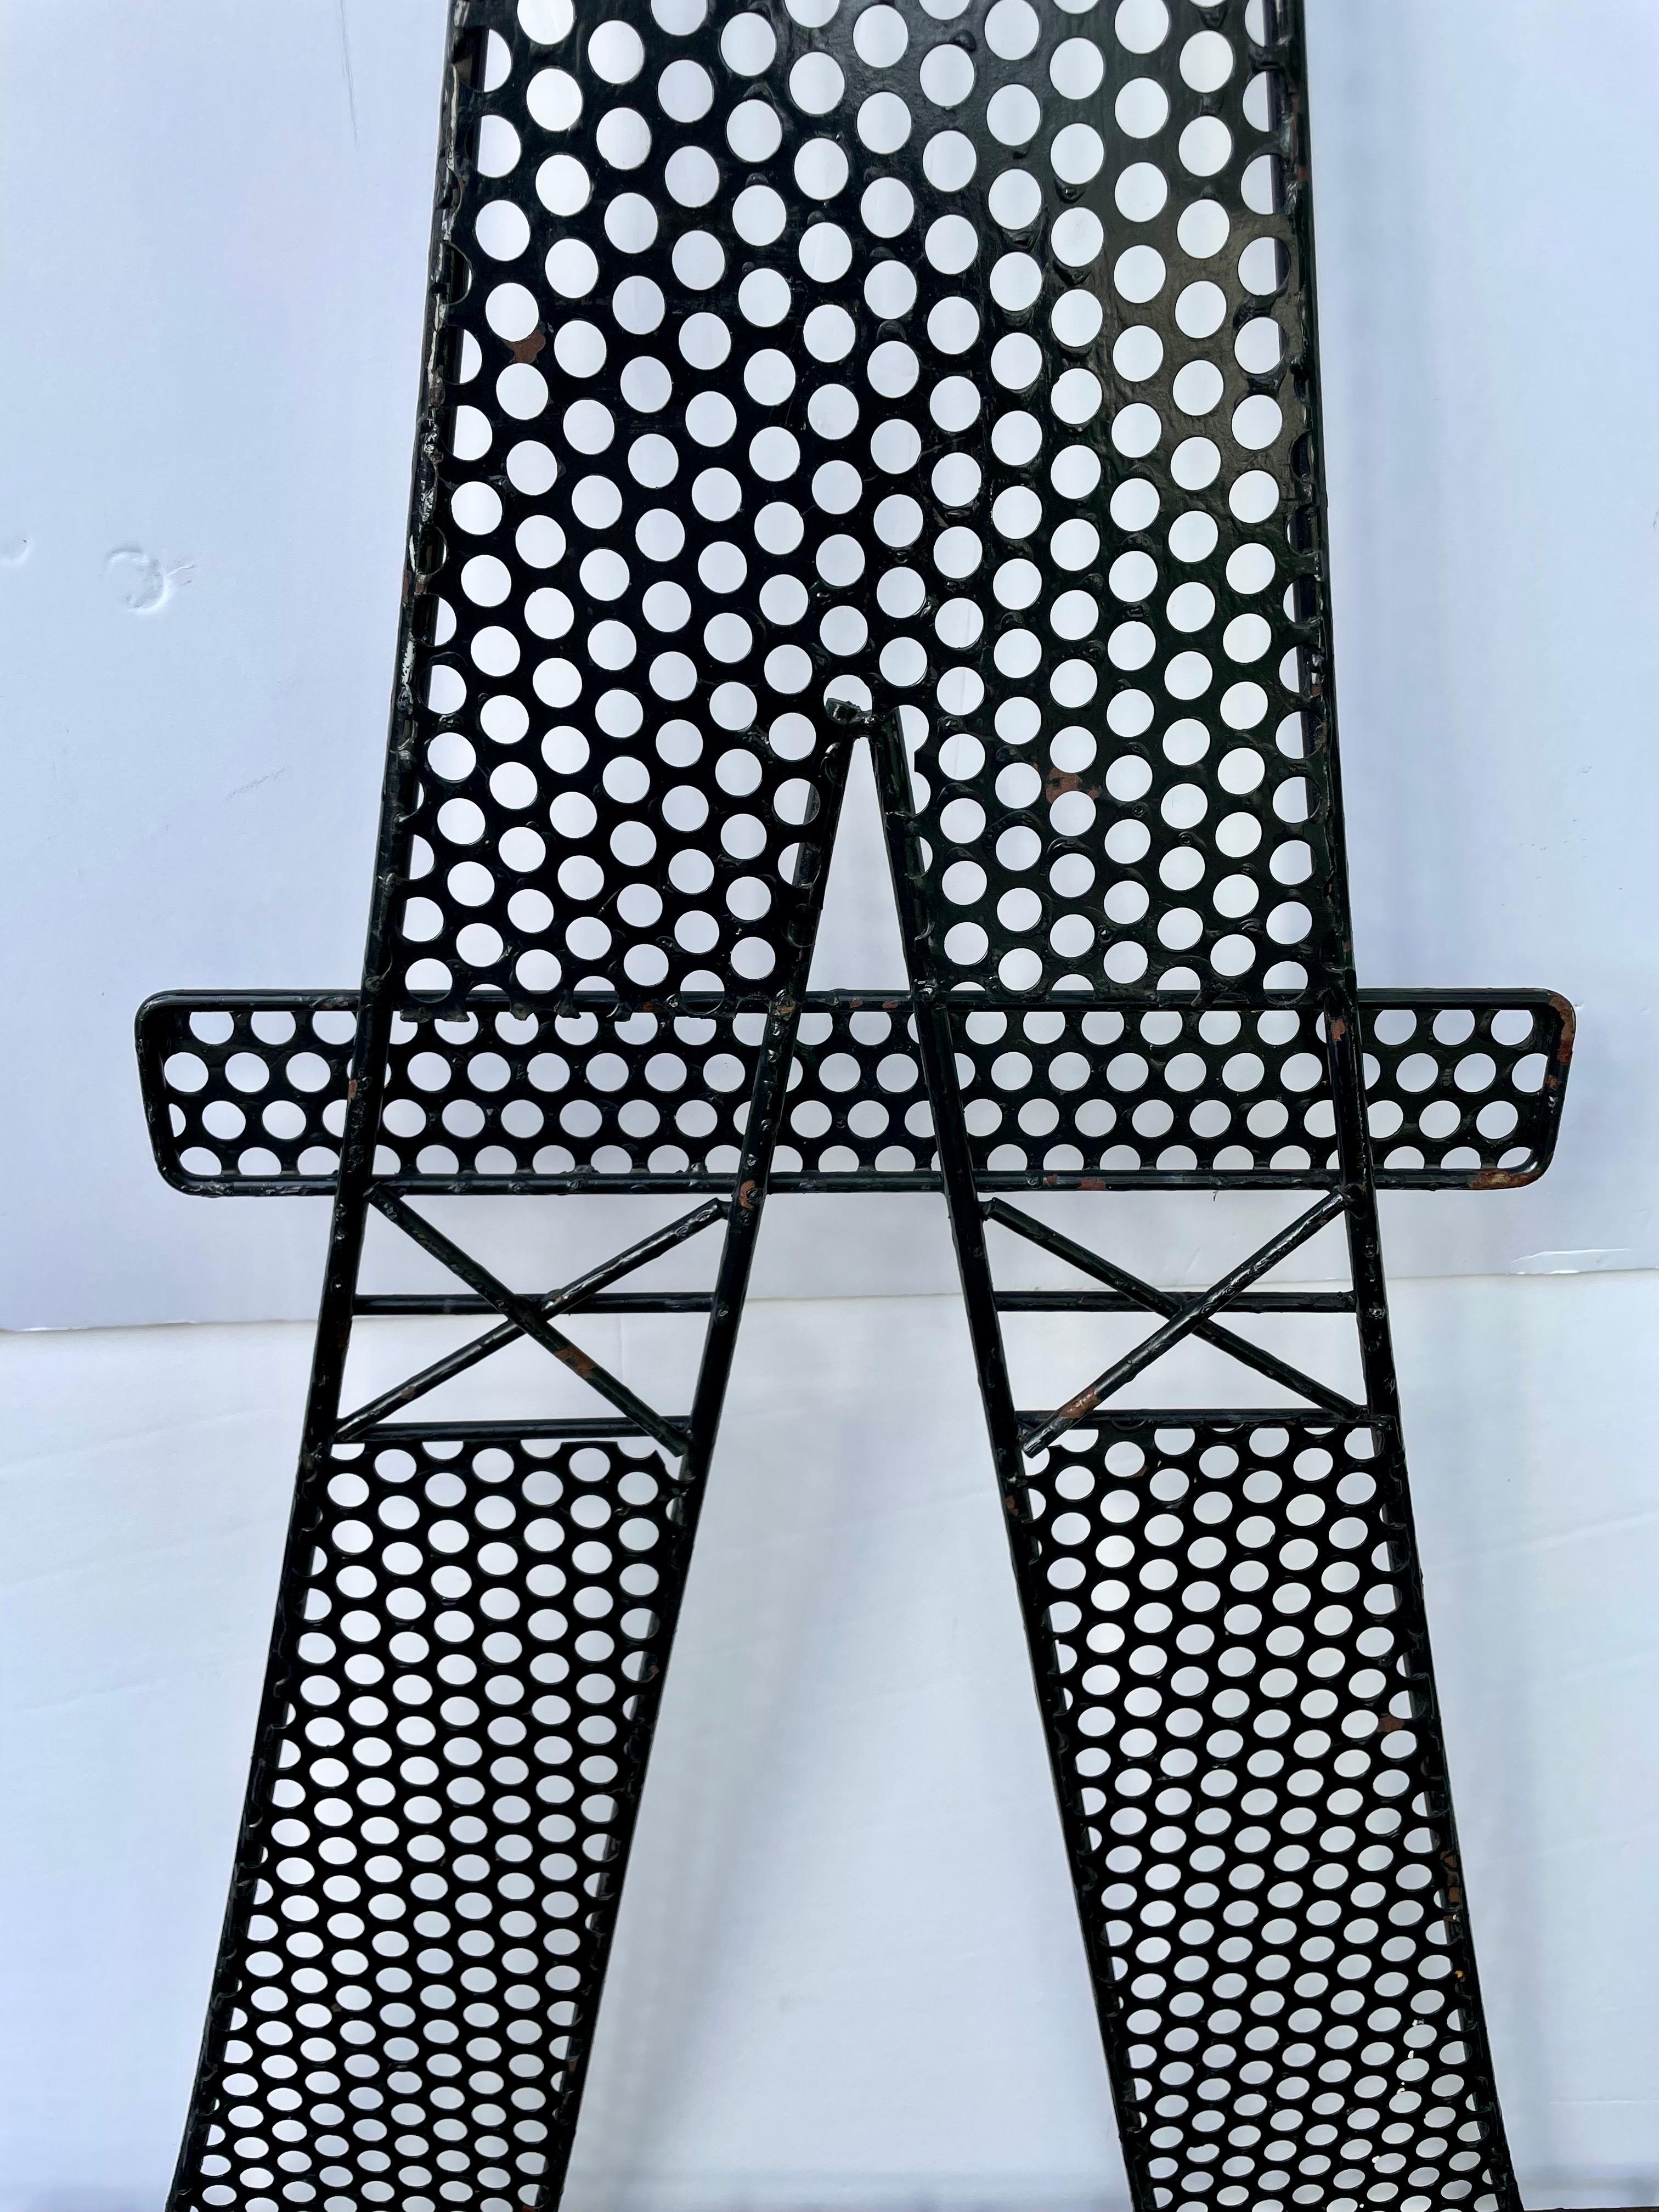 7 Foot Eiffel Tower Décor Piece used as Garden Trellis. One of a kind, Custom made for a Florida designer between the 1950s- 1970s. Was first used indoors in a Paris themed Great Room and them moved out to the garden in the 1990s. It is made of